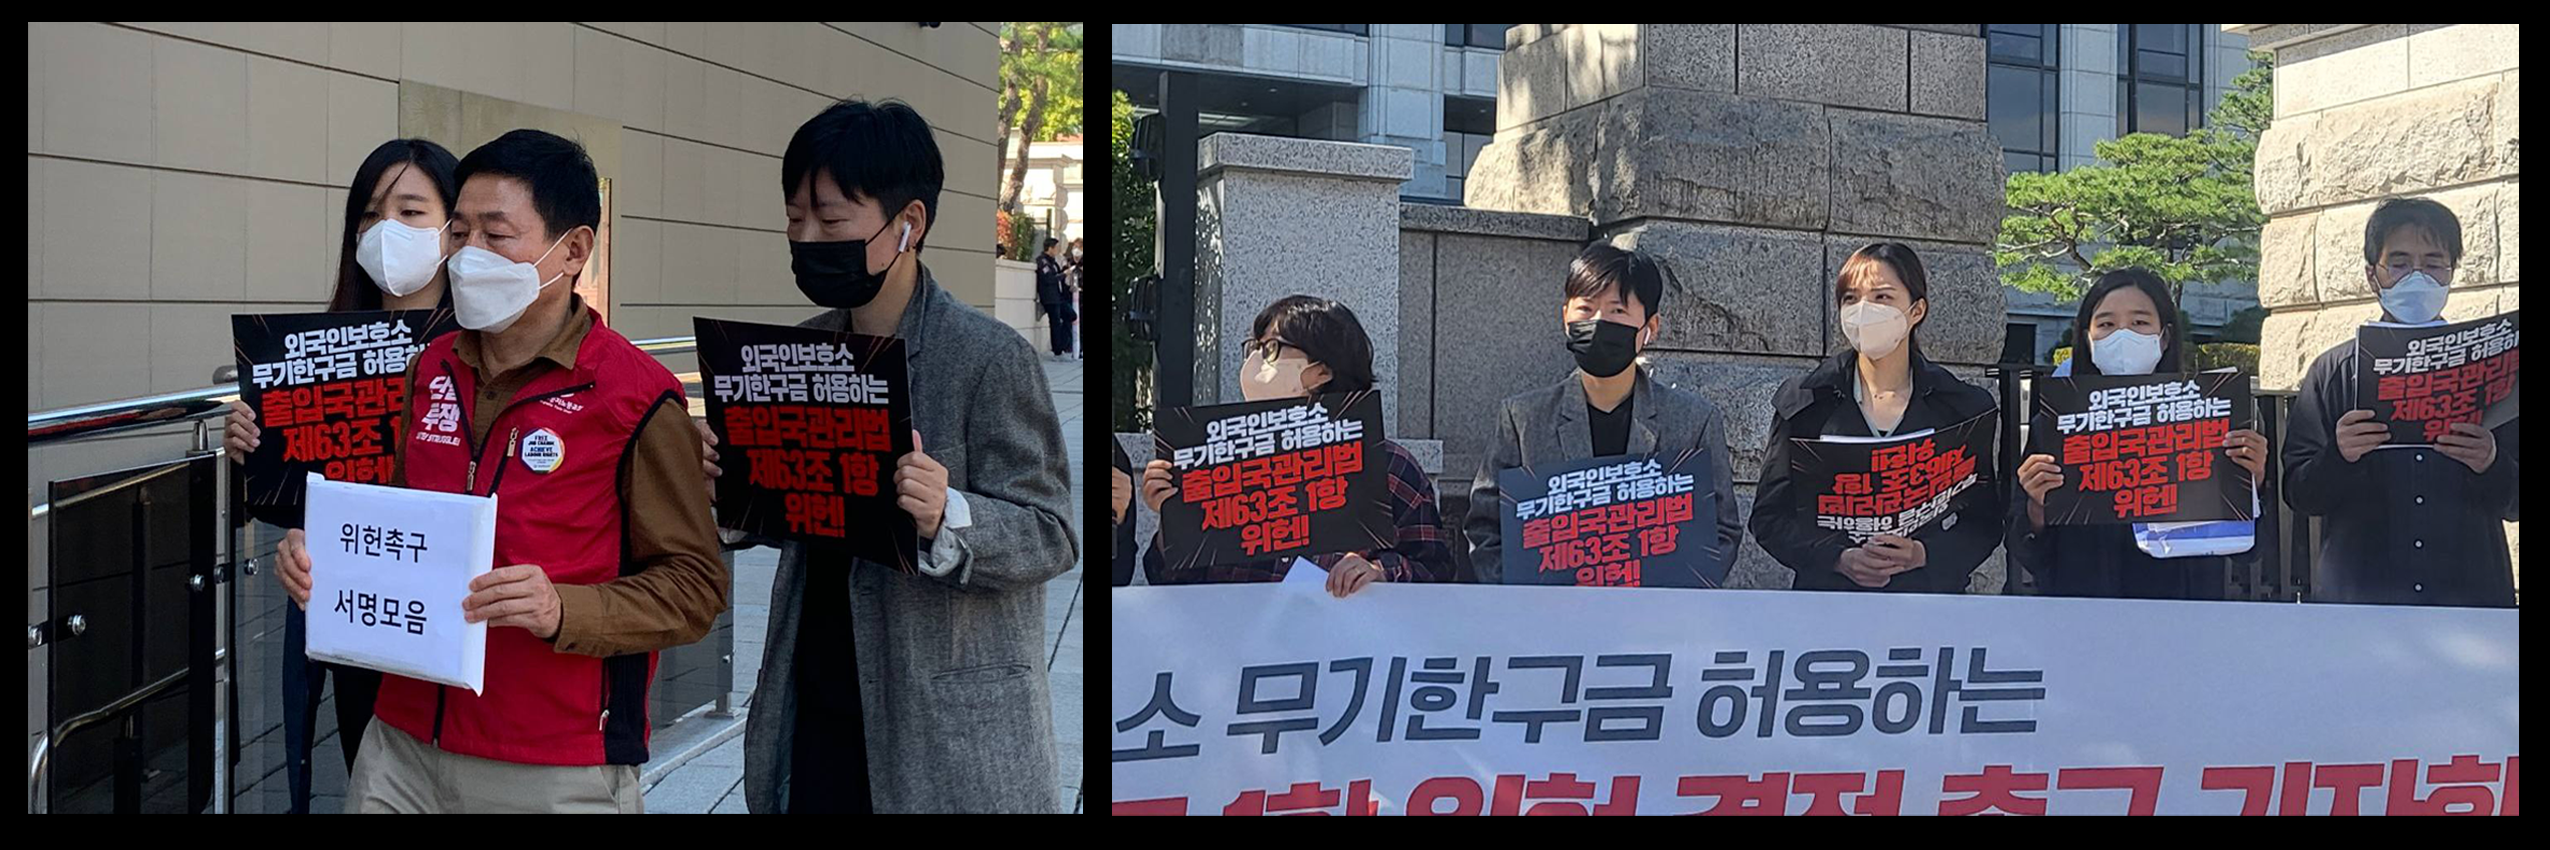 (Left) Submission of 6,000 signatures calling for the declaration that article 63 of the Immigration Act is unconstitutional (Right) Press conference calling for the declaration that article 63 of the Immigration Act is unconstitutional